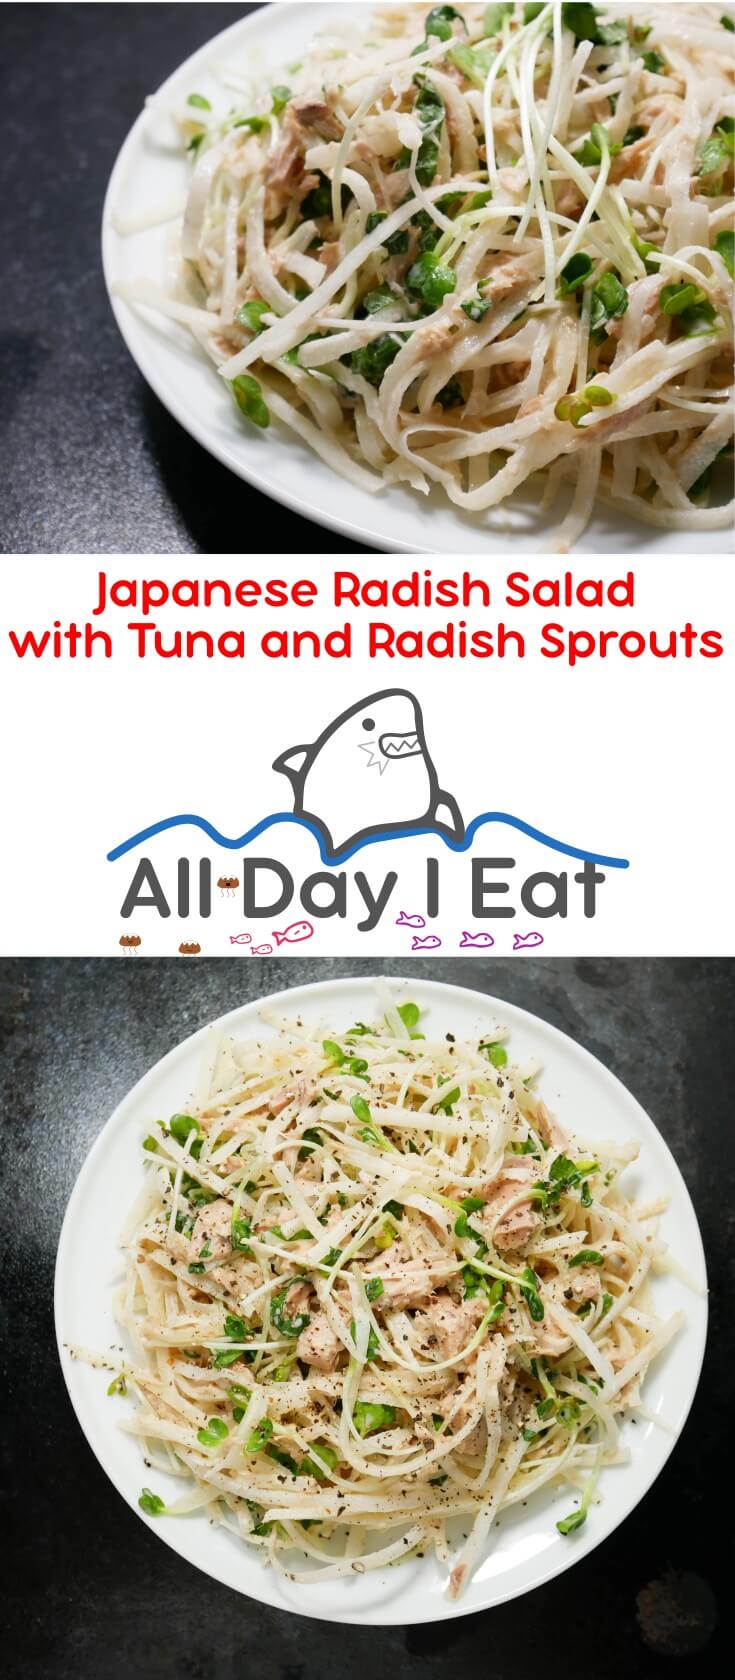 Japanese Radish Salad with Radish sprouts (kaiware). A light and tasty side salad with tuna that has a good crunch in each bite! | www.alldayieat.com